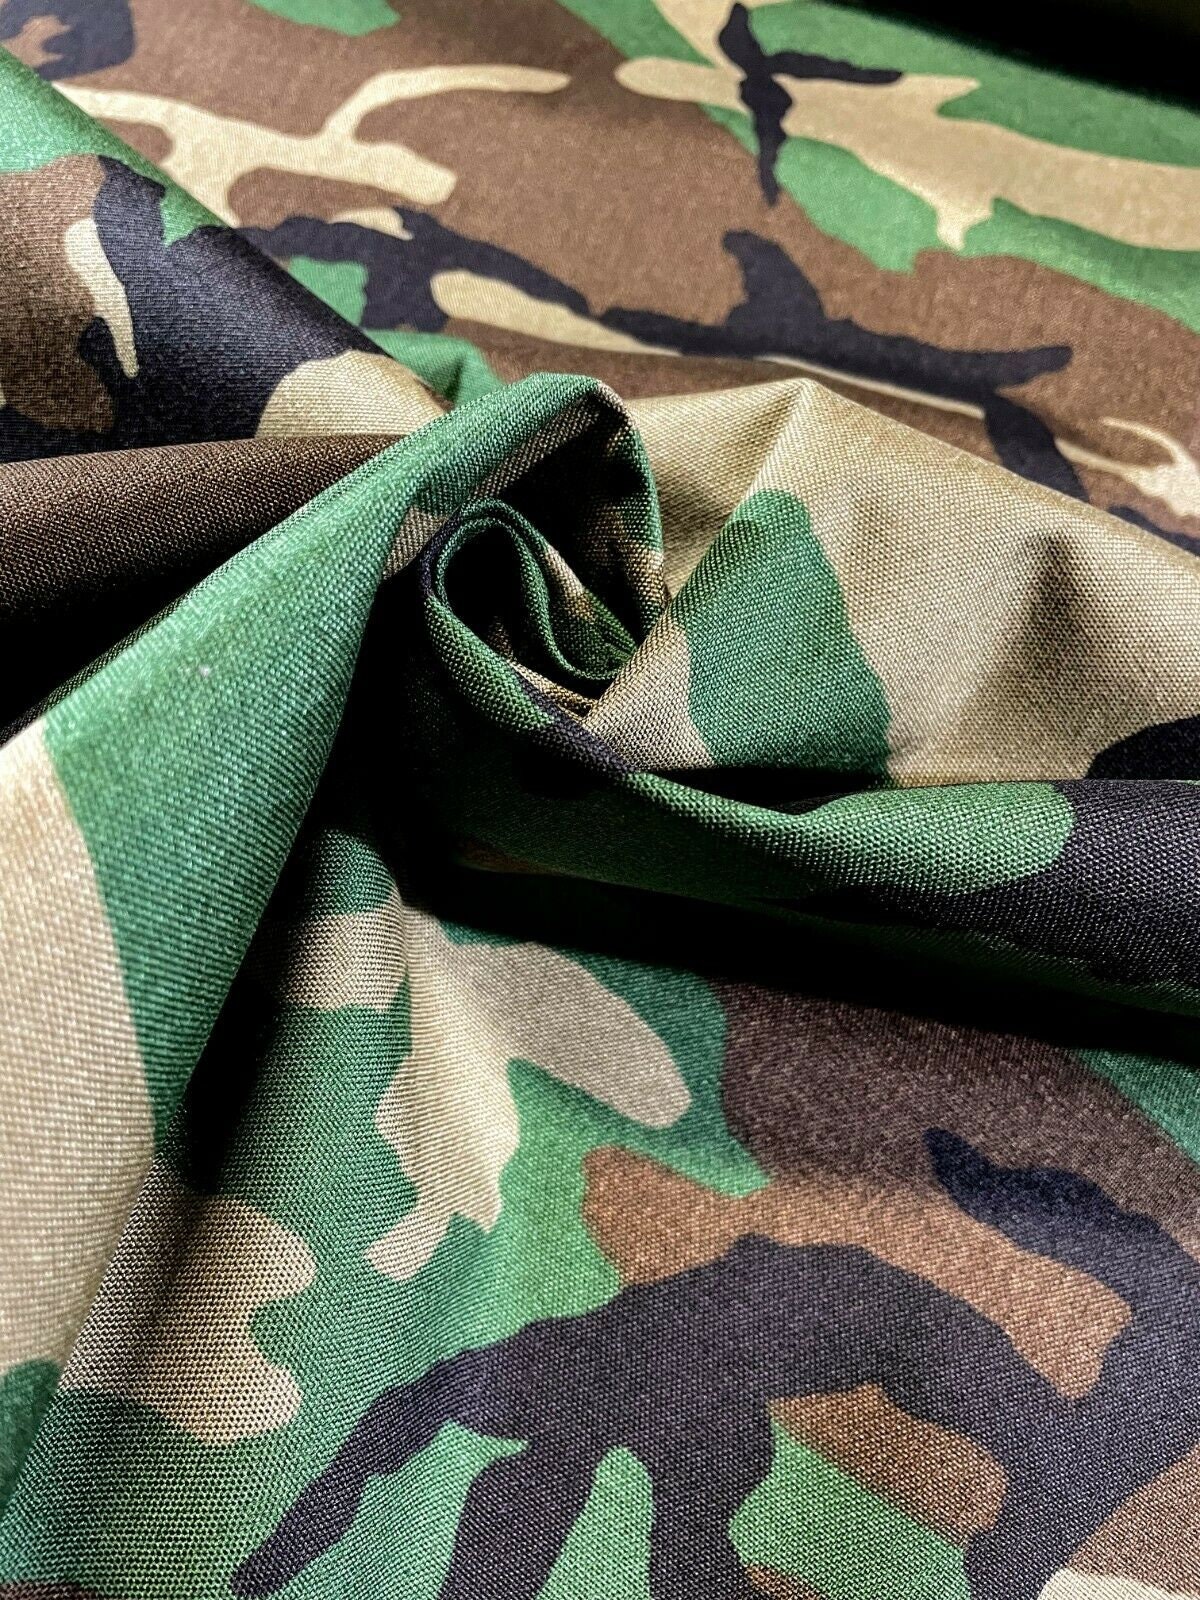 Woodlands Military 500D Coated Hunting Camo Fabric Cordura DWR | Etsy